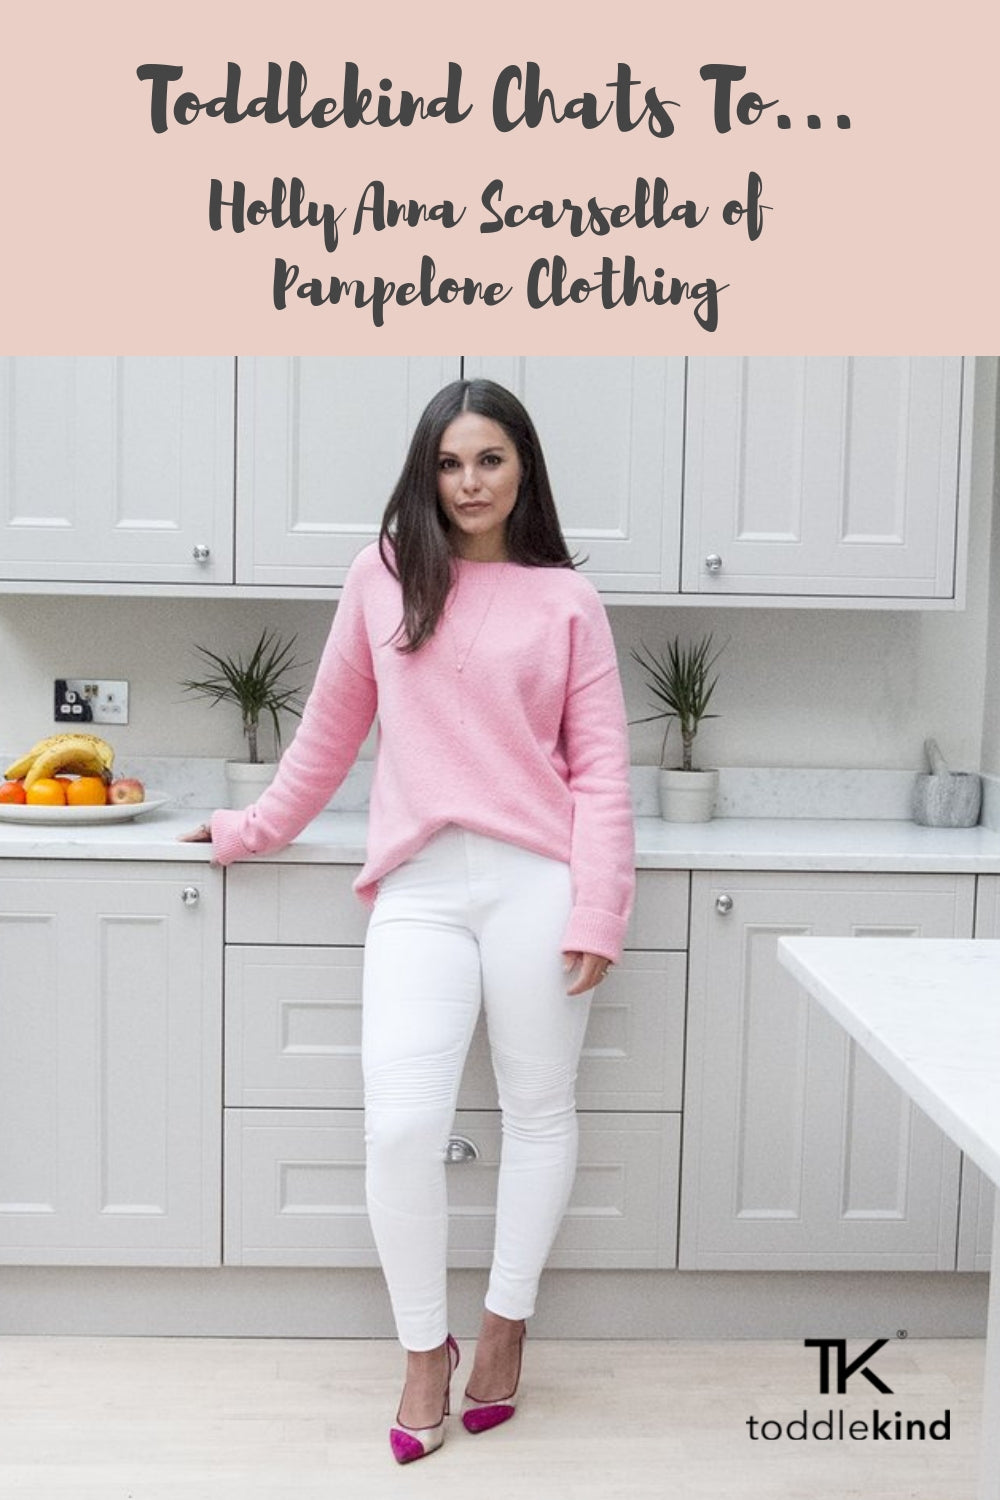 Toddlekind Pinterest Holly Anna Scarsella of Pampelone Clothing